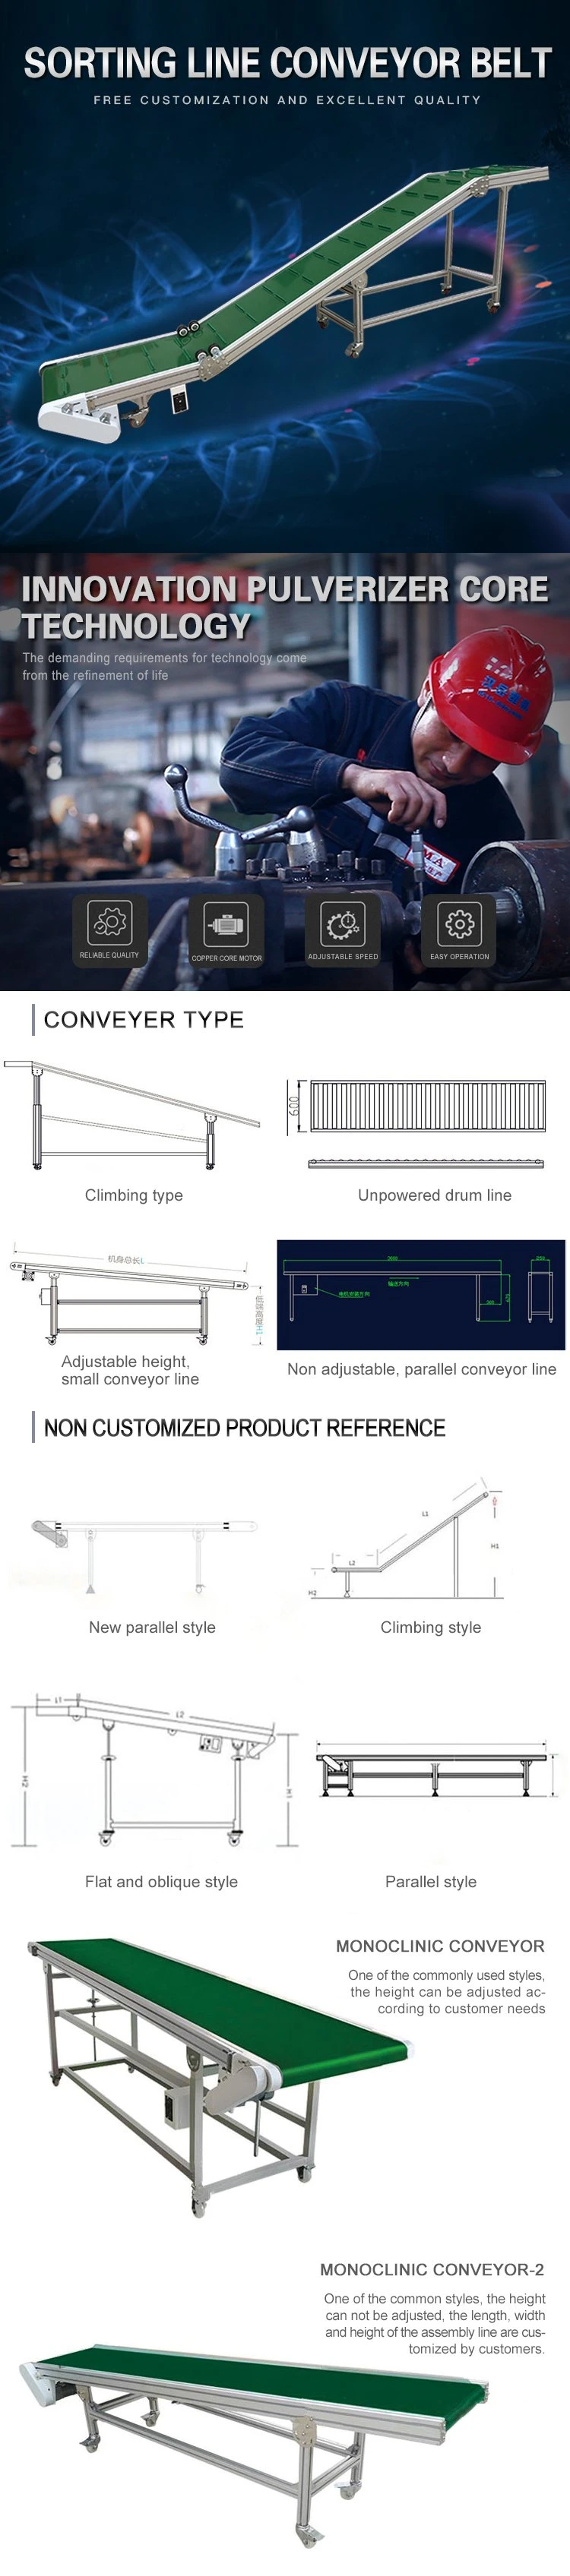 90 Degree Curve Rubber Belt Conveyor Stainless Steel Conveyor with Adjustable Height